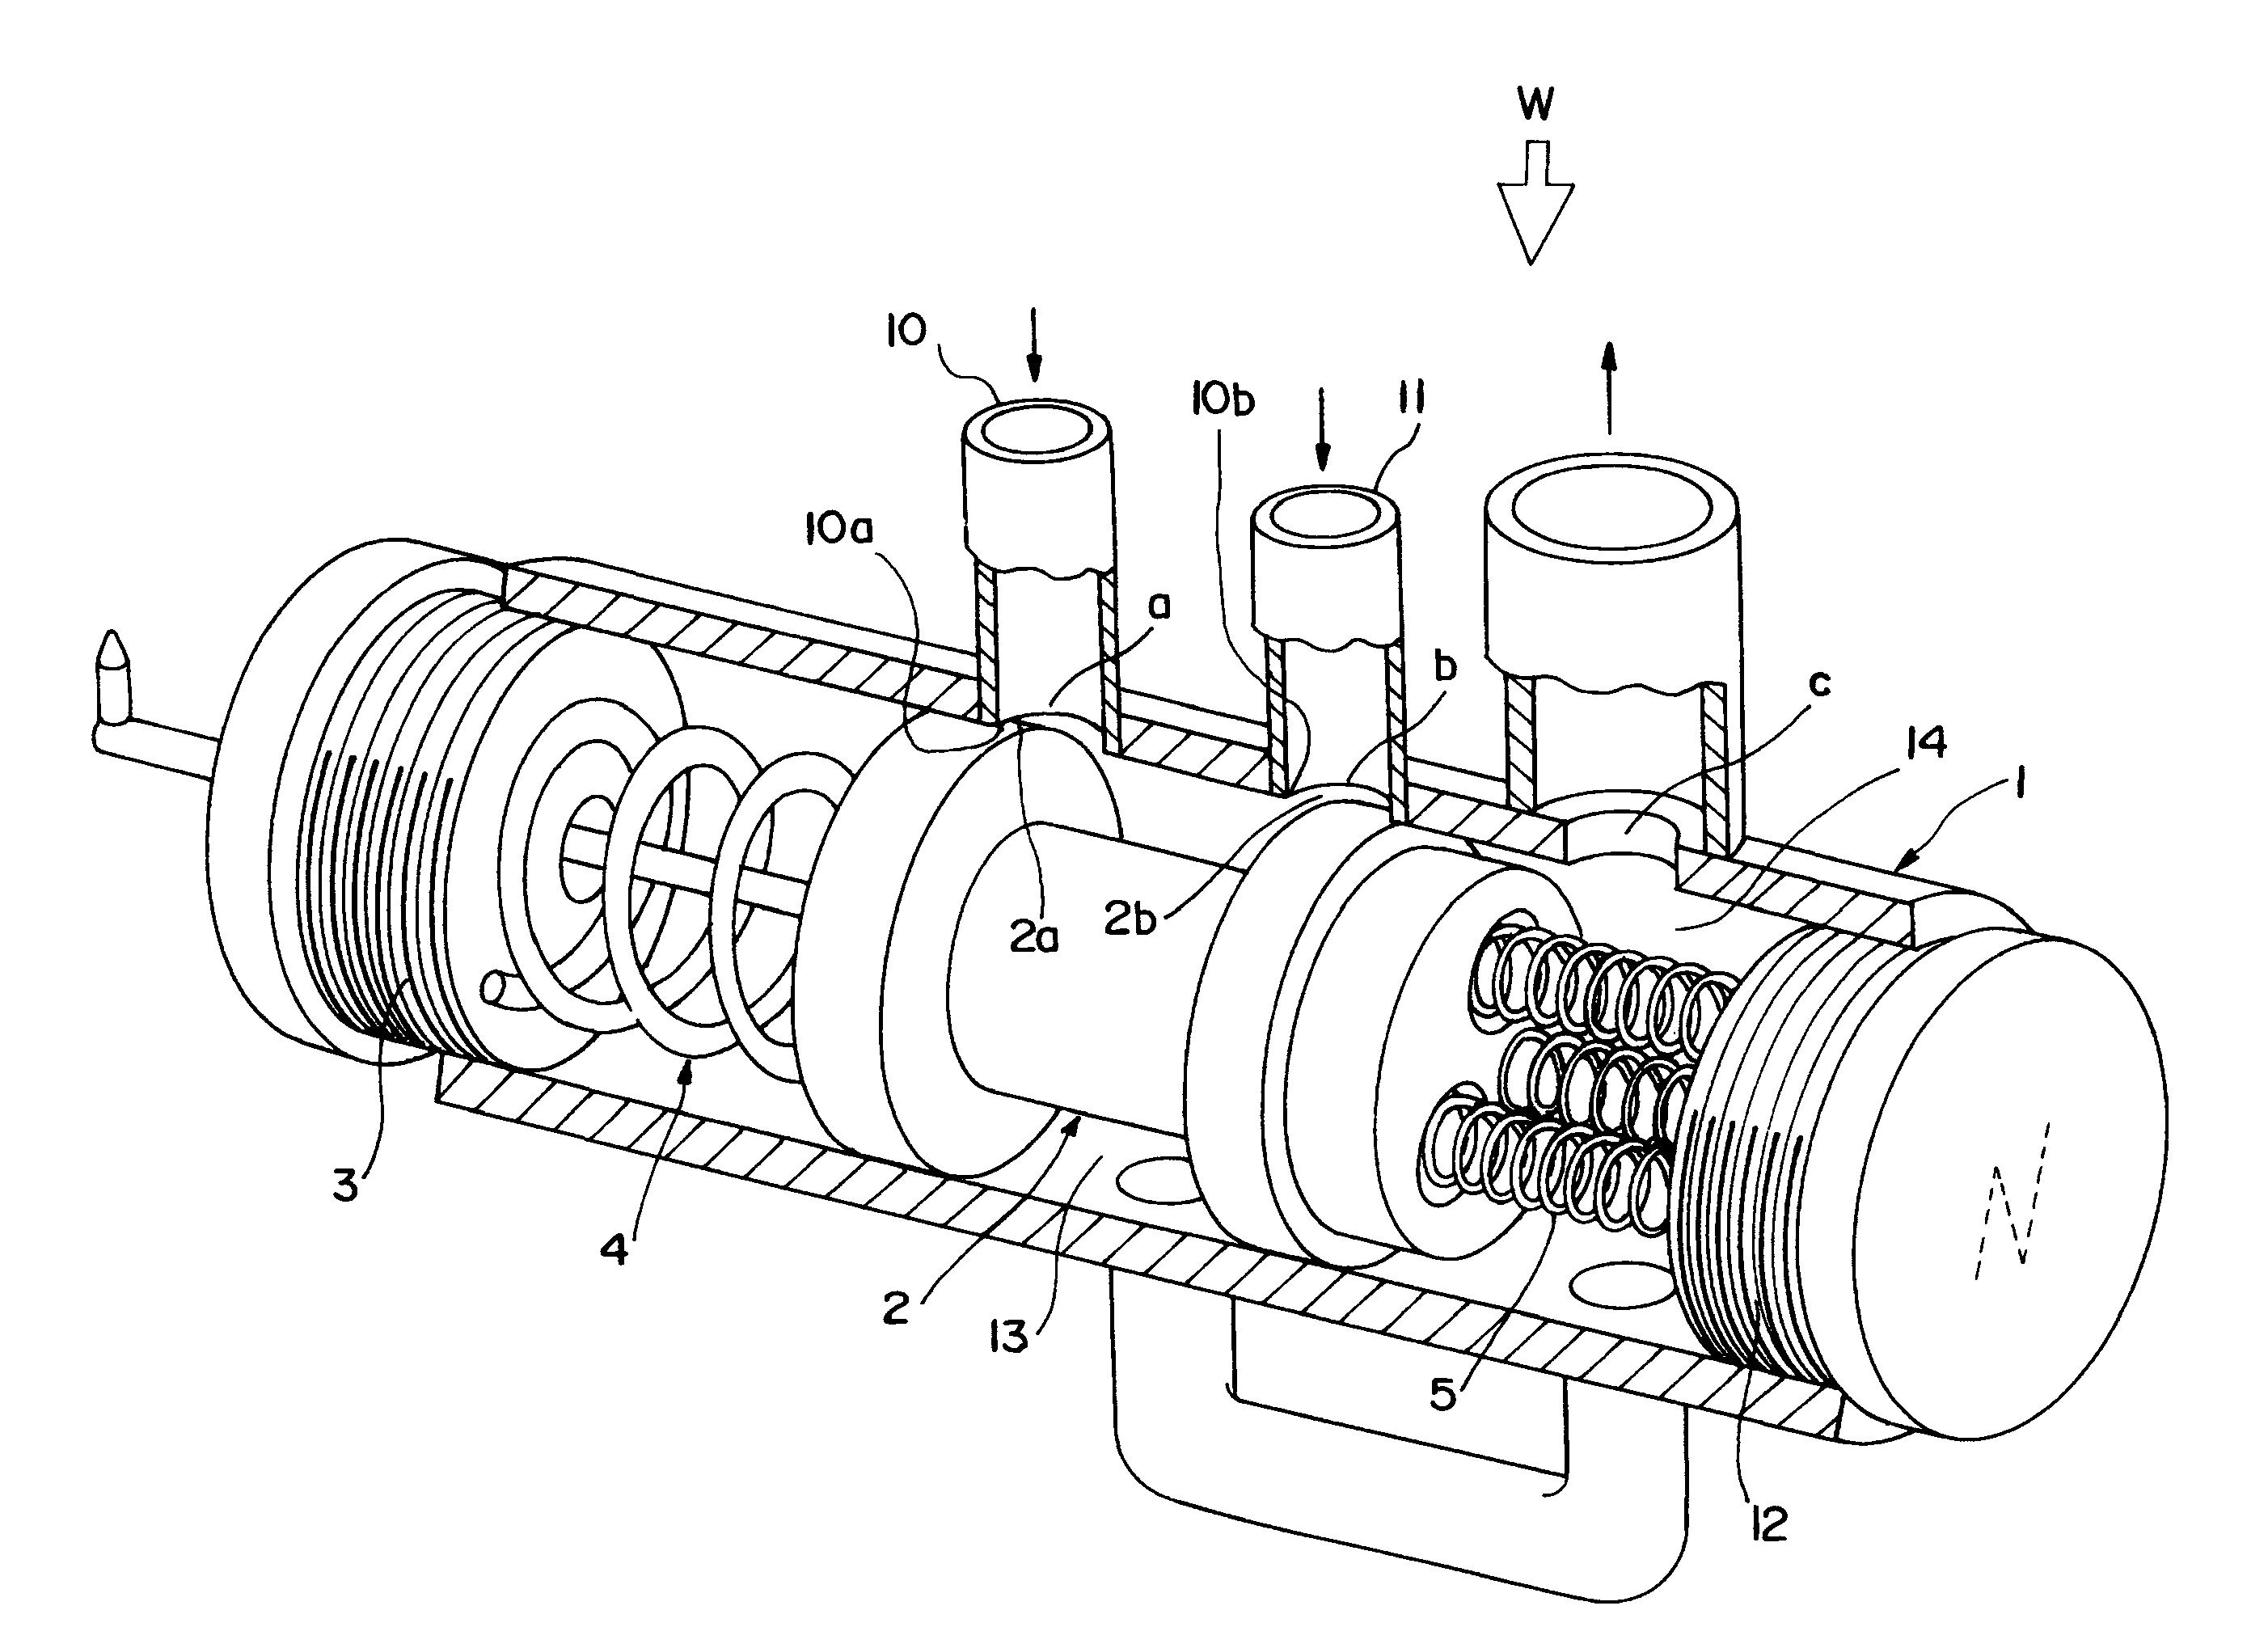 Thermally actuated hot and cold water mixing valve configured to minimize valve hunting